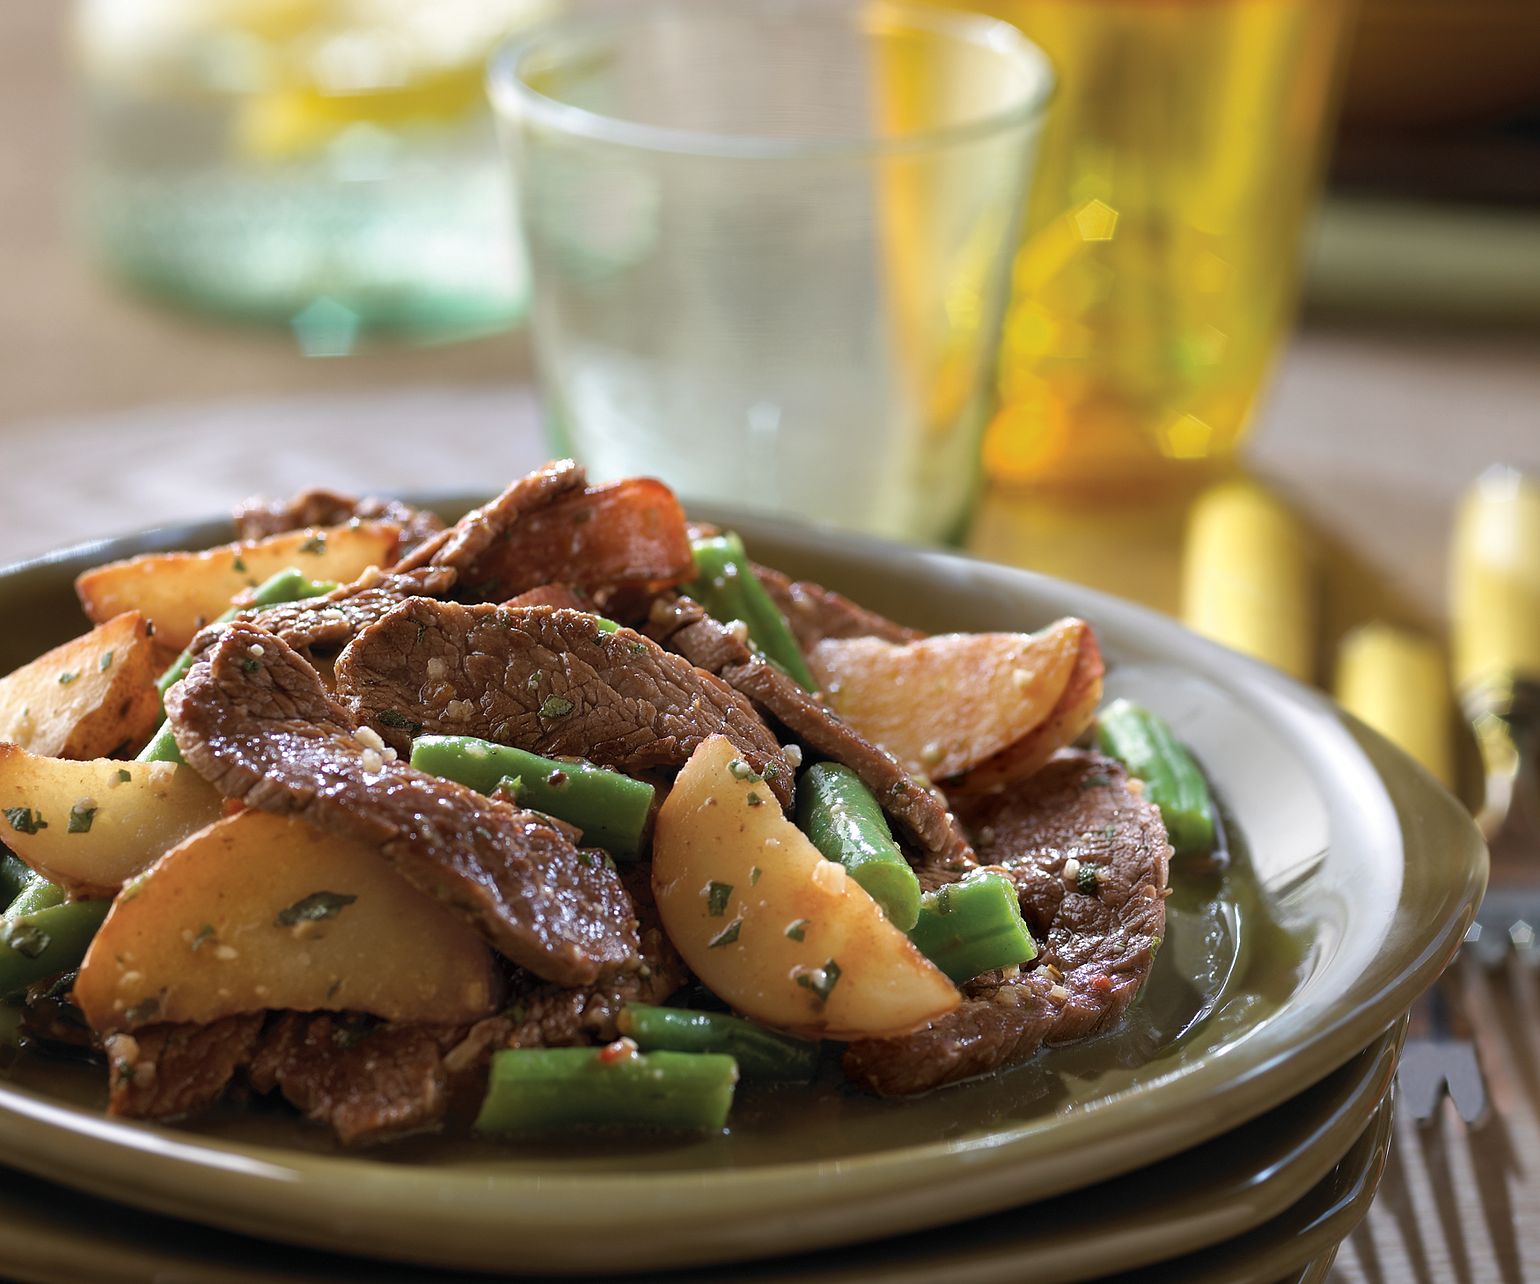 Beefy Potato Salad with Green Beans